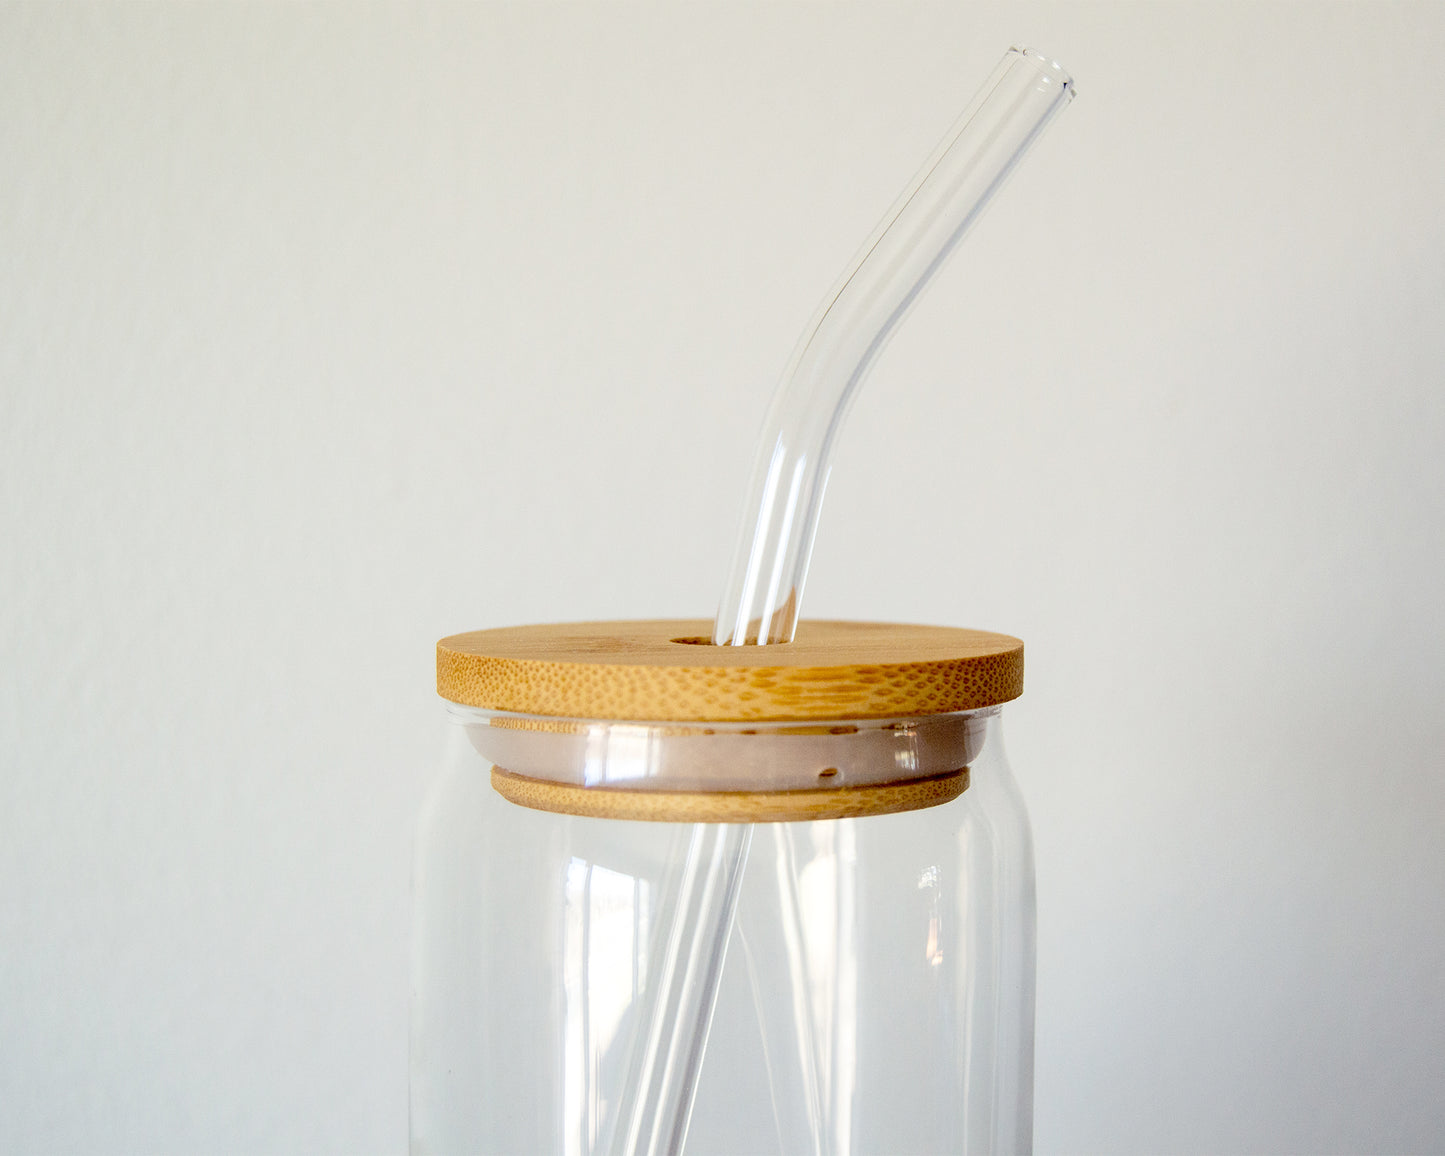 Custom Glass Can Tumbler with Lid & Straw – Achy Smile Shop